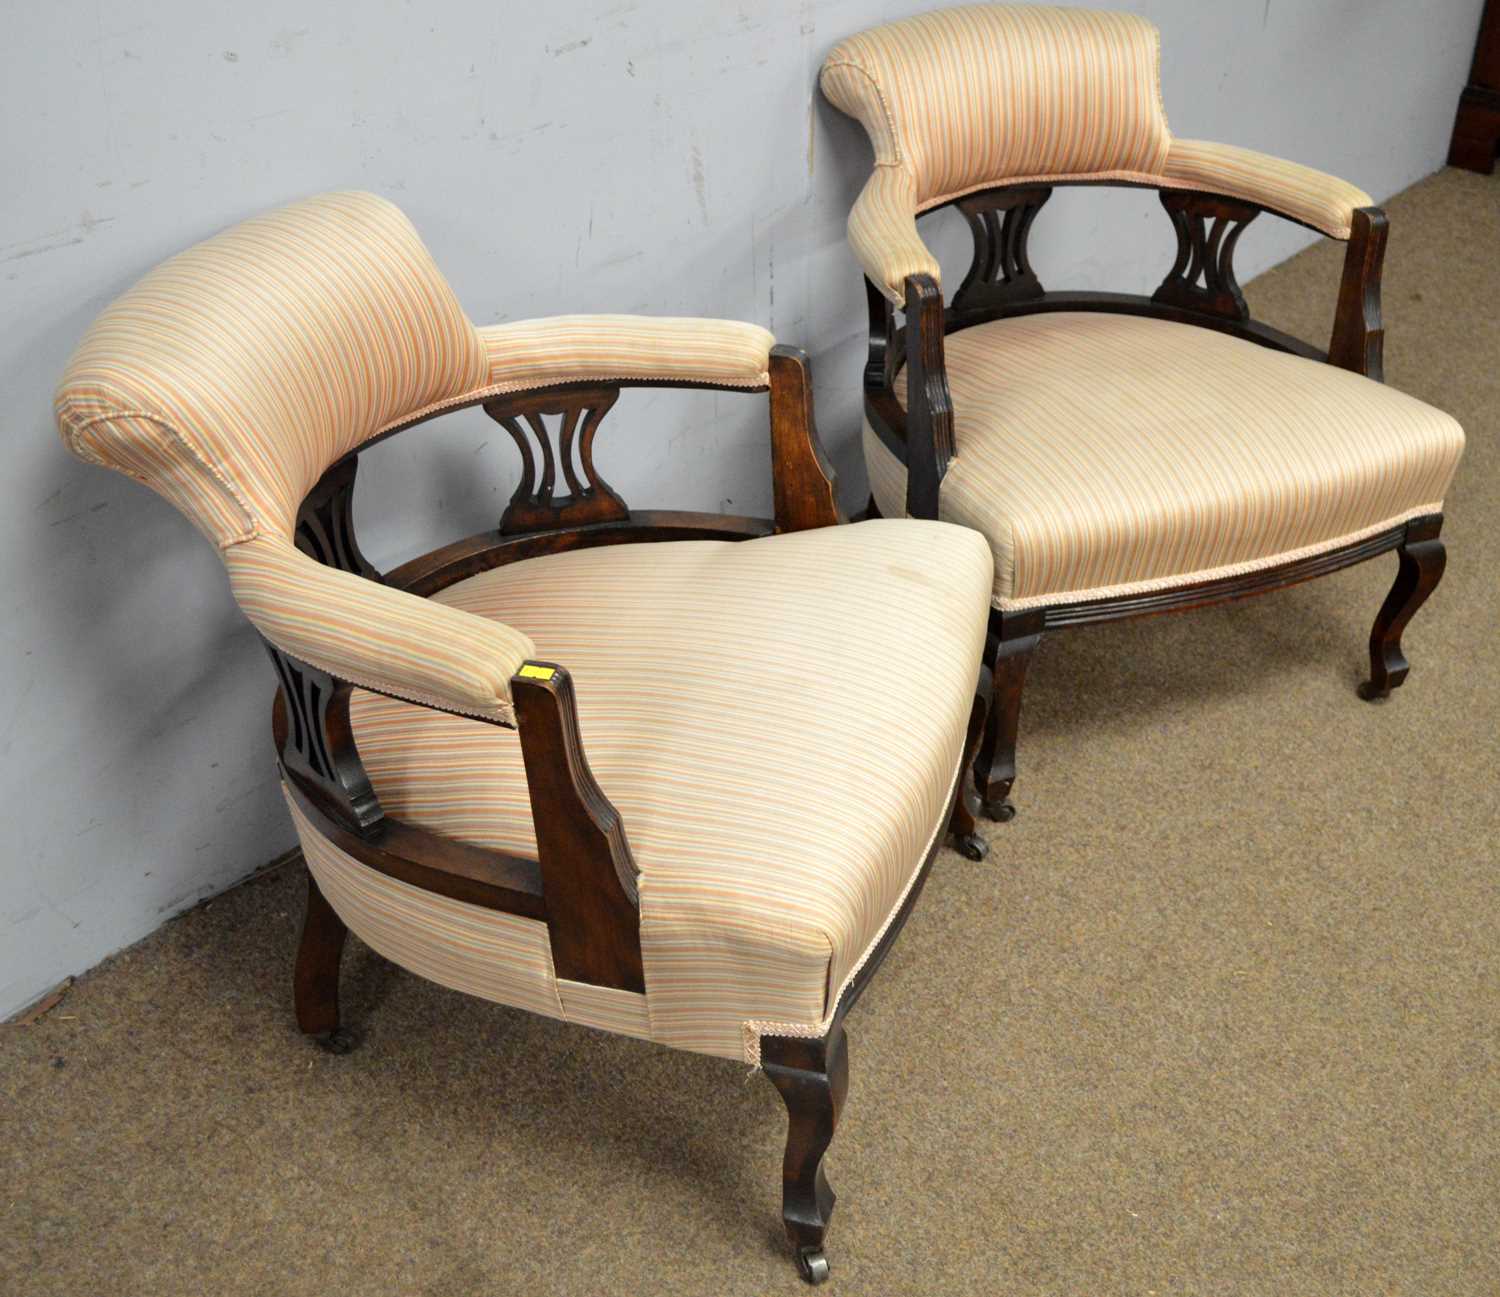 A pair of late Victorian tub chairs - Image 3 of 3